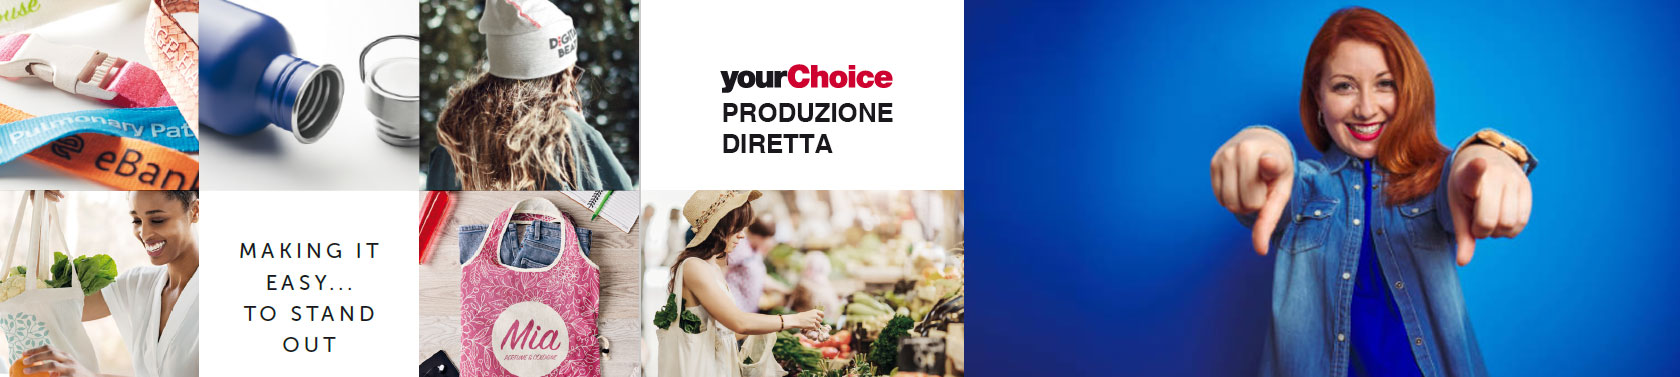 YOURCHOICE